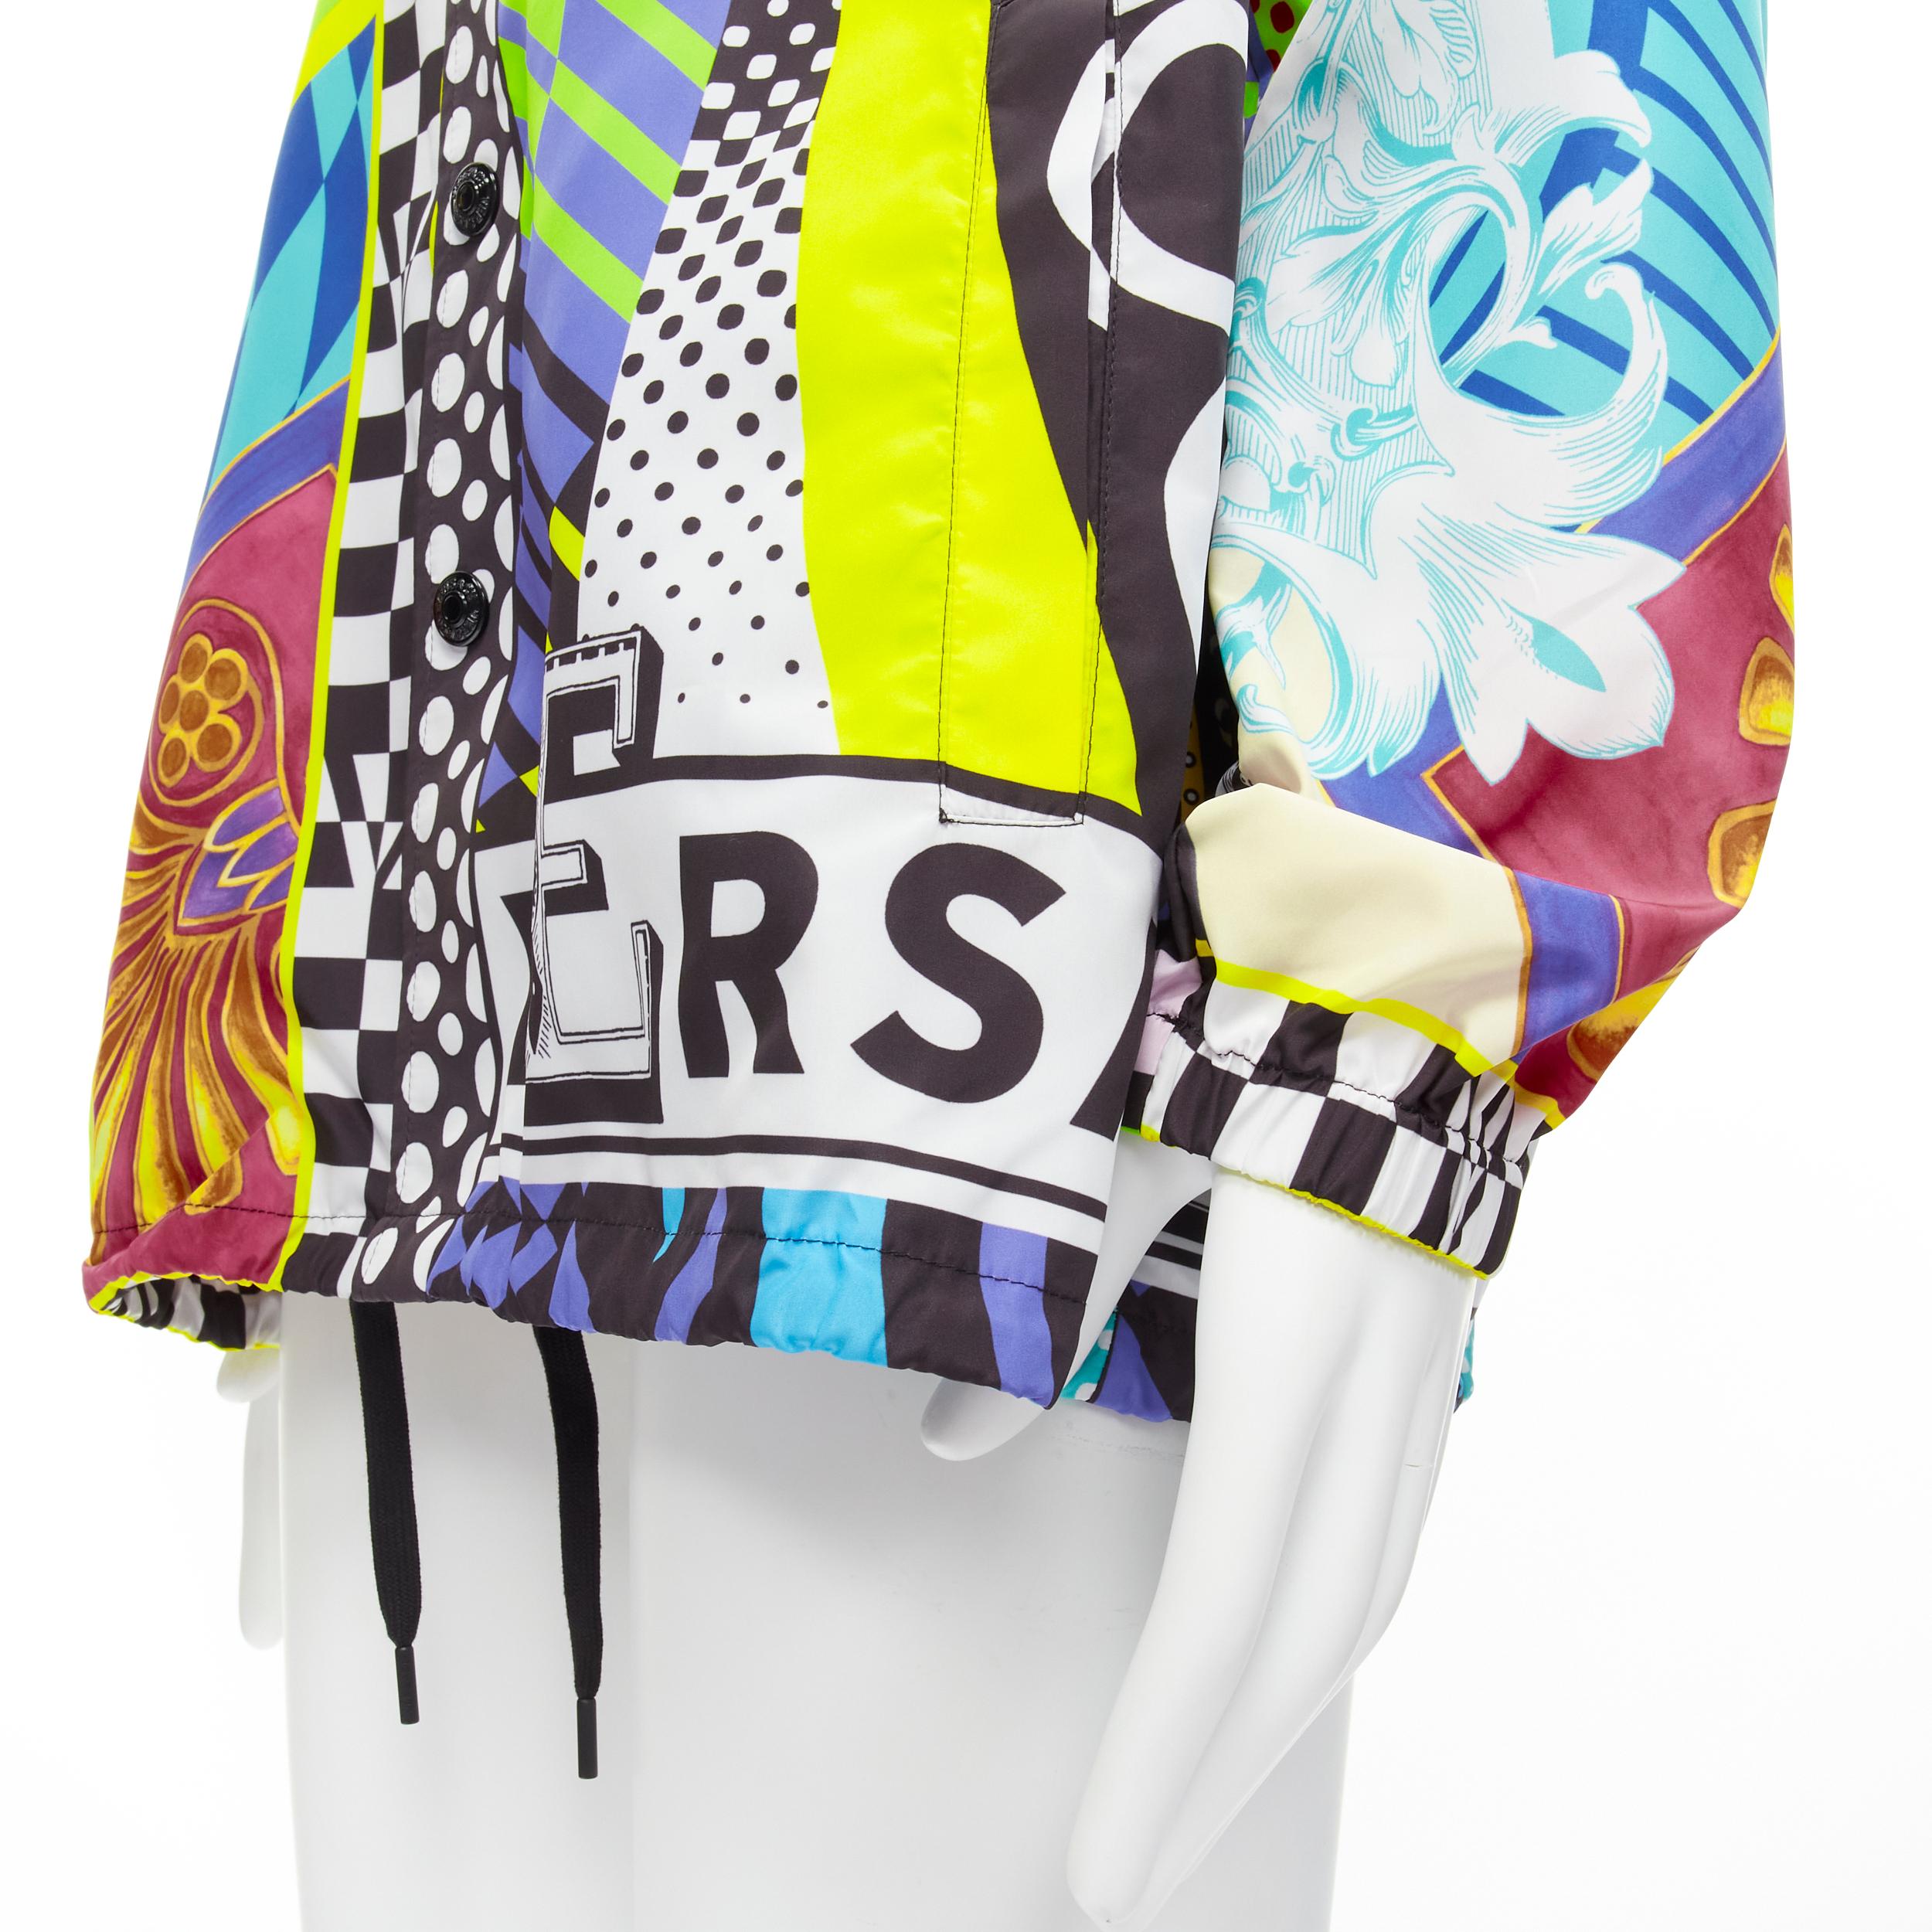 new VERSACE 2020 Runway Pop Temple nylon windbreaker over shirt jacket IT50 L
Reference: TGAS/C00122
Brand: Versace
Designer: Donatella Versace
Collection: Pop Temple Runway
Material: Nylon
Color: Multicolor
Pattern: Abstract
Closure: Button
Extra